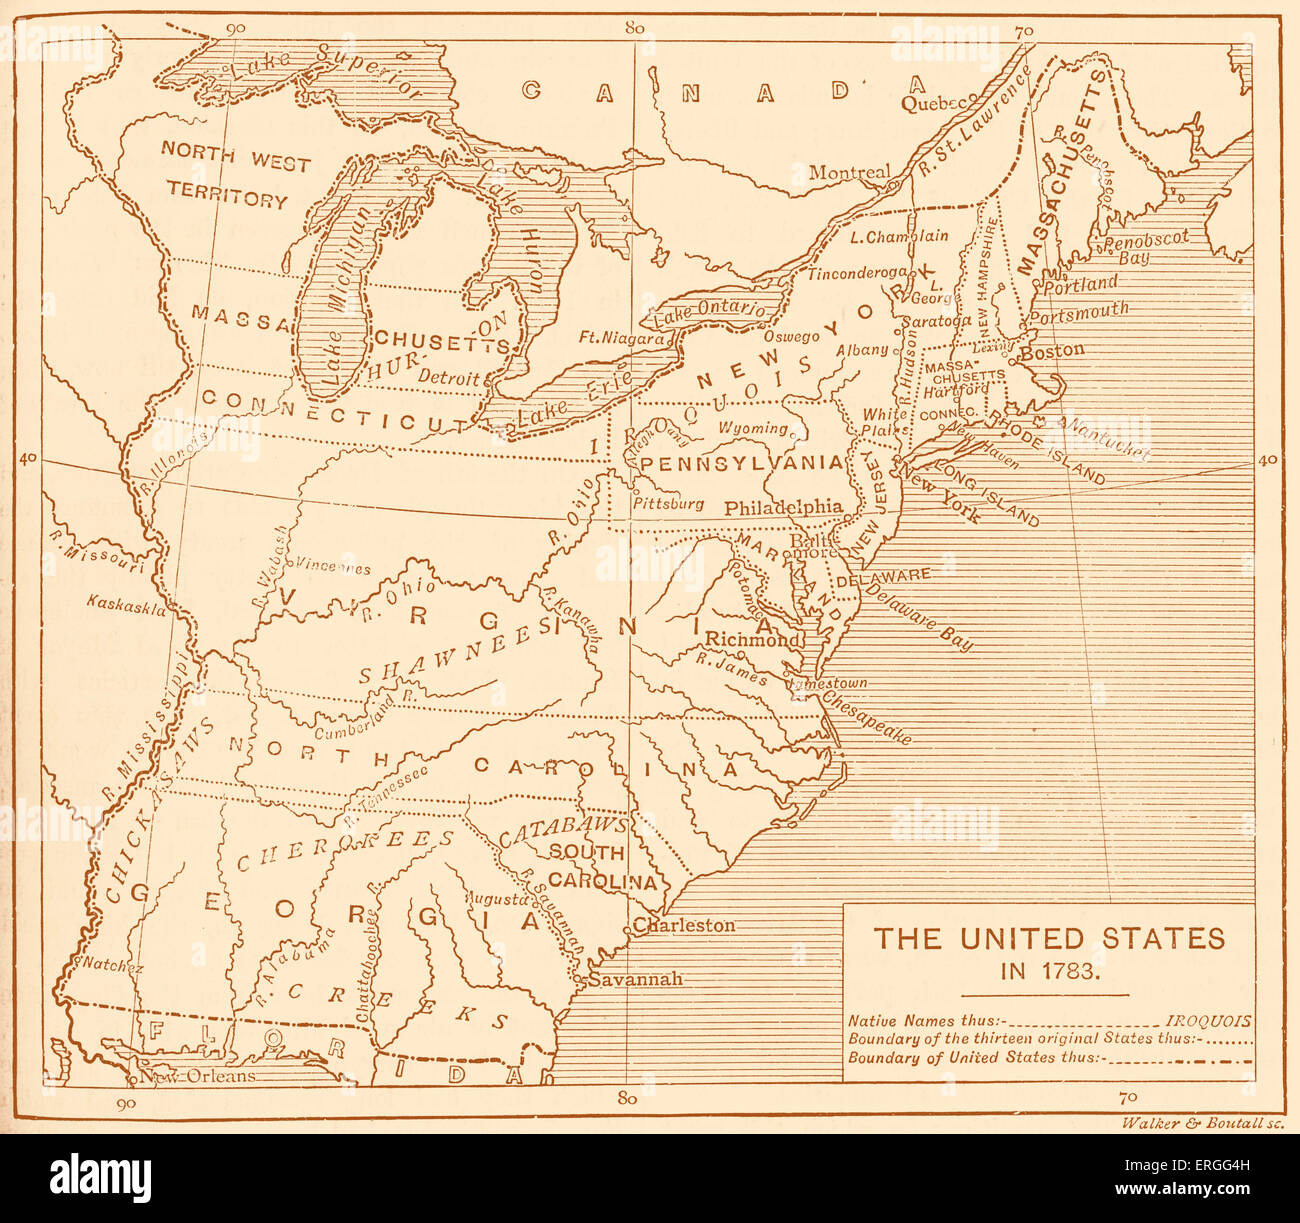 Map of post-independence United States, 1783. Shows the thirteen original states, national boundary and Native American location names. Stock Photo